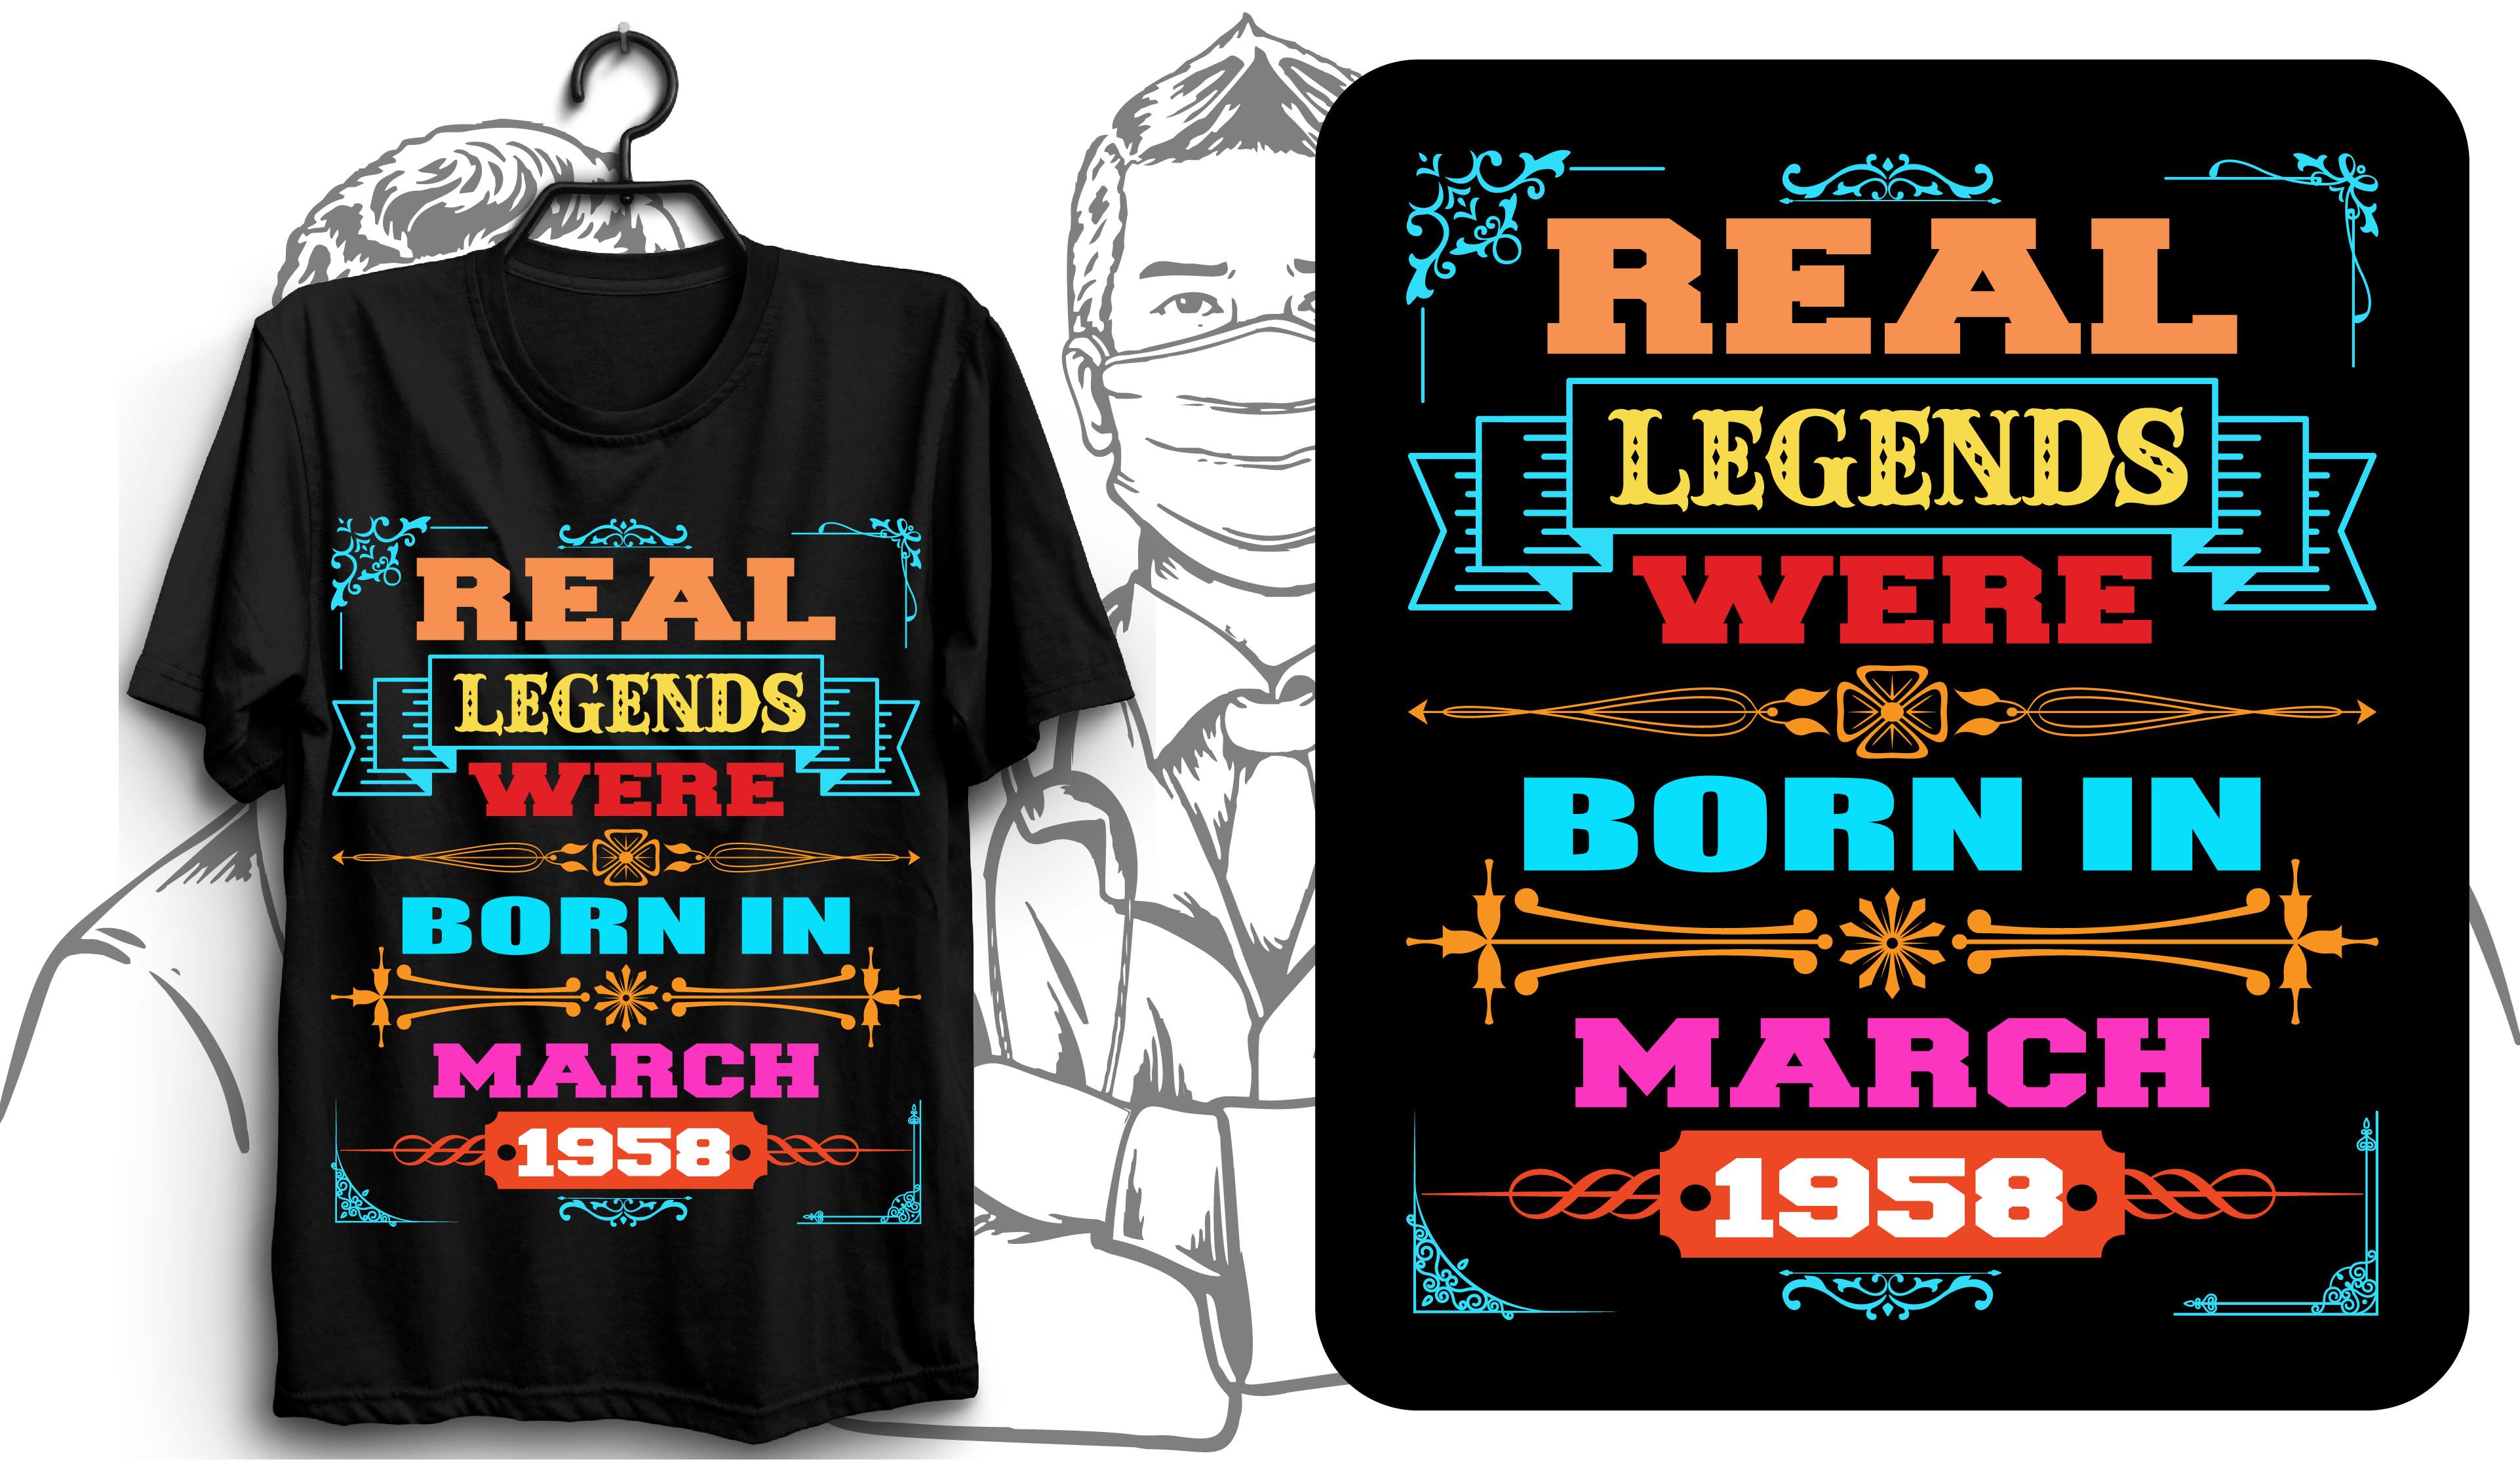 Real Legends Were Born in March 1958